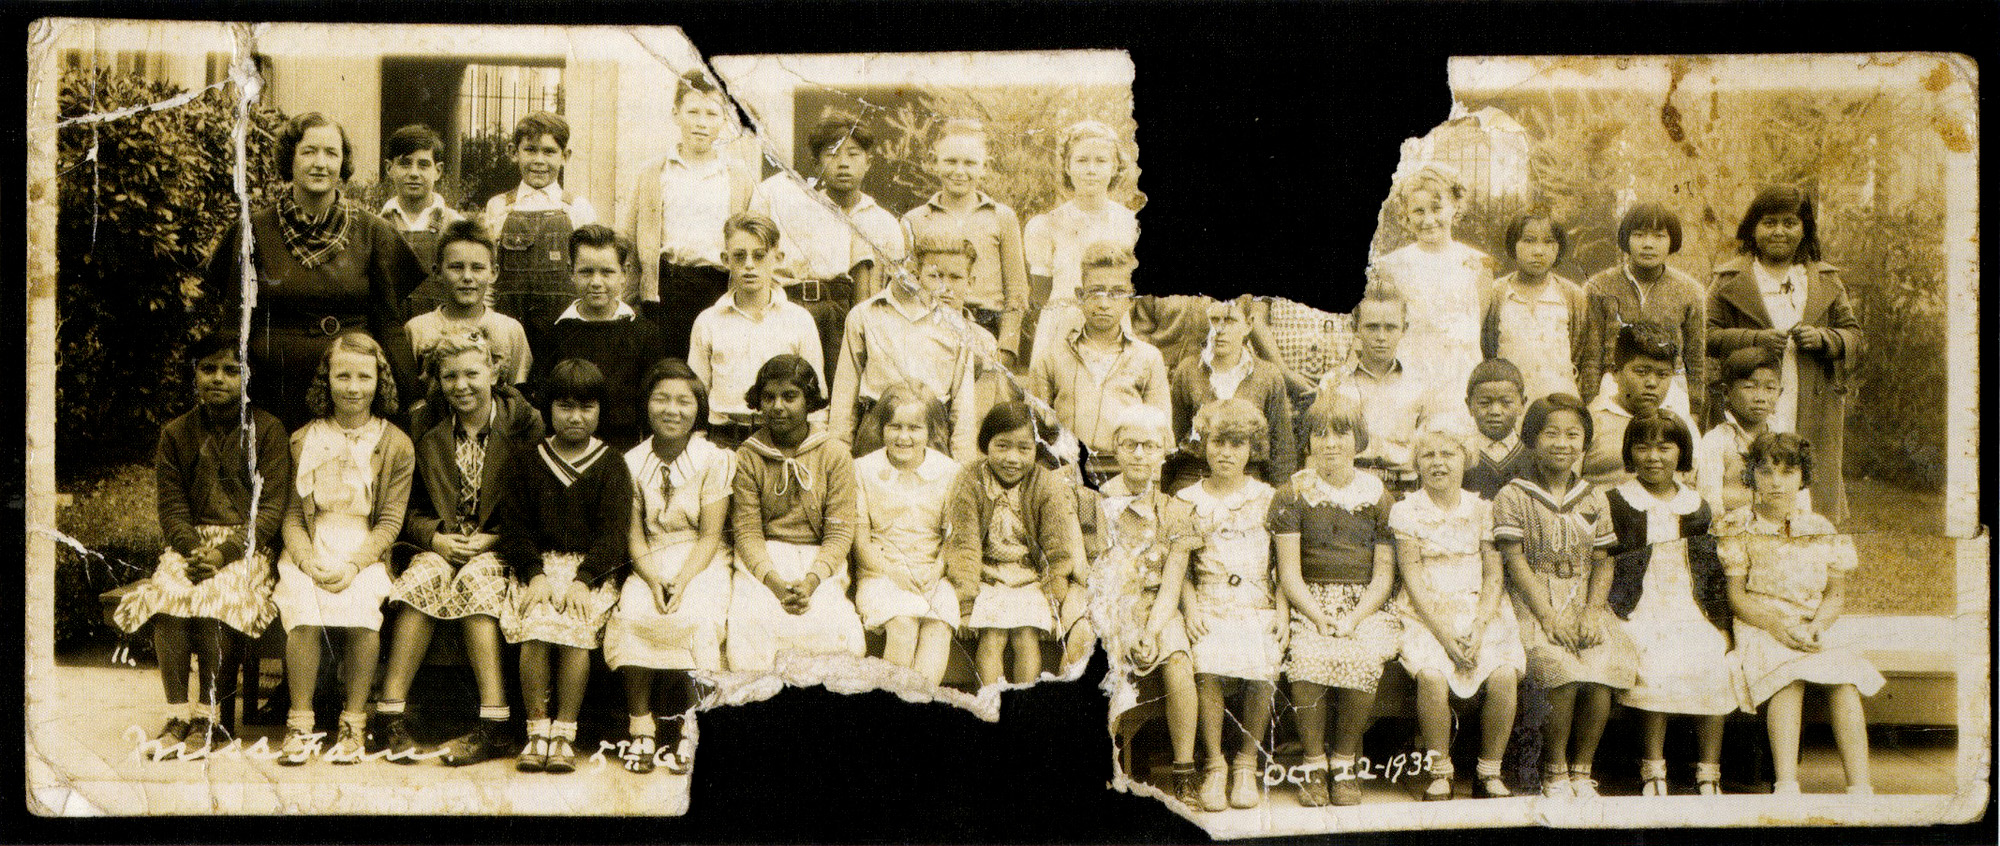 Ruth (front row, center) in Ms. Fain's class, 1935